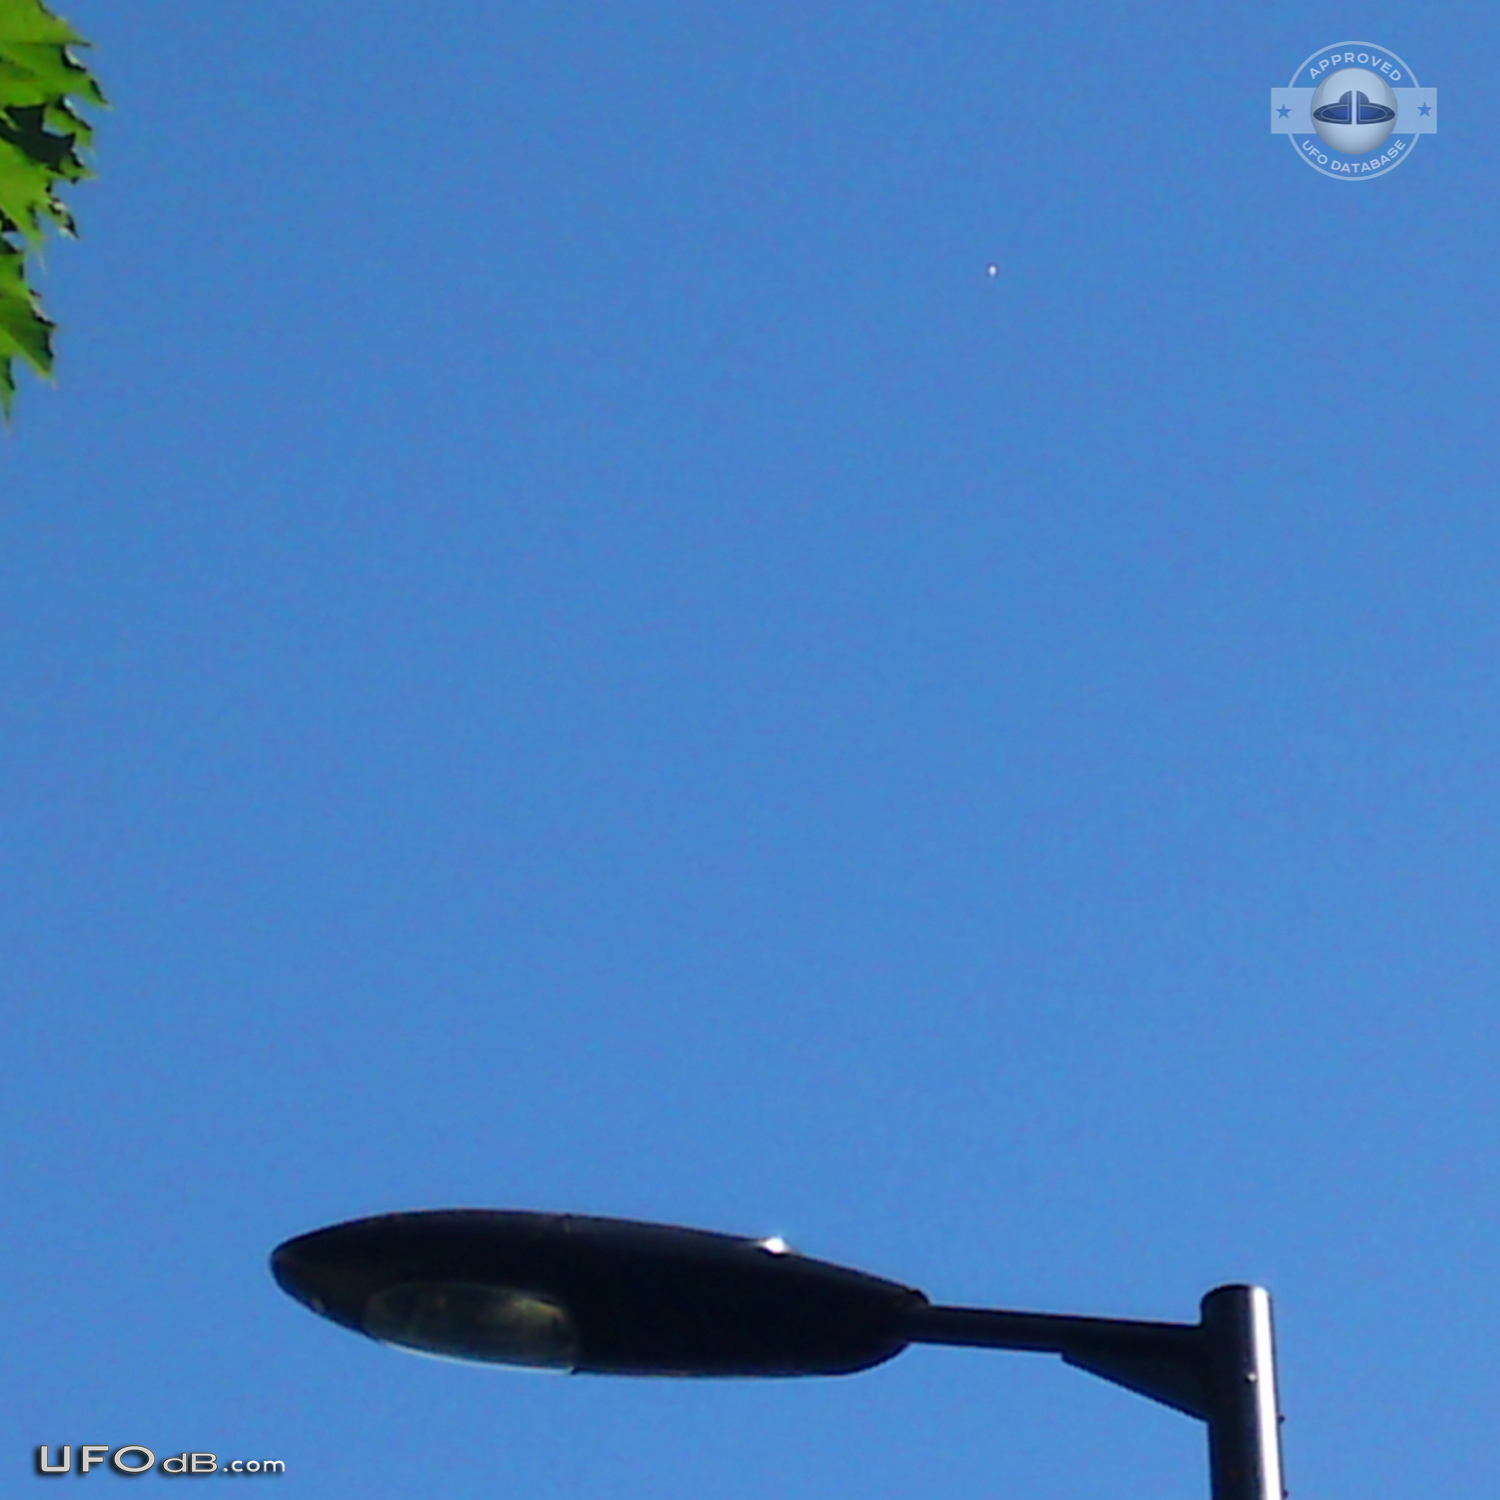 Daytime Spherical UFO UK East London, 2010-07-09, Clear Weather UFO Picture #540-1